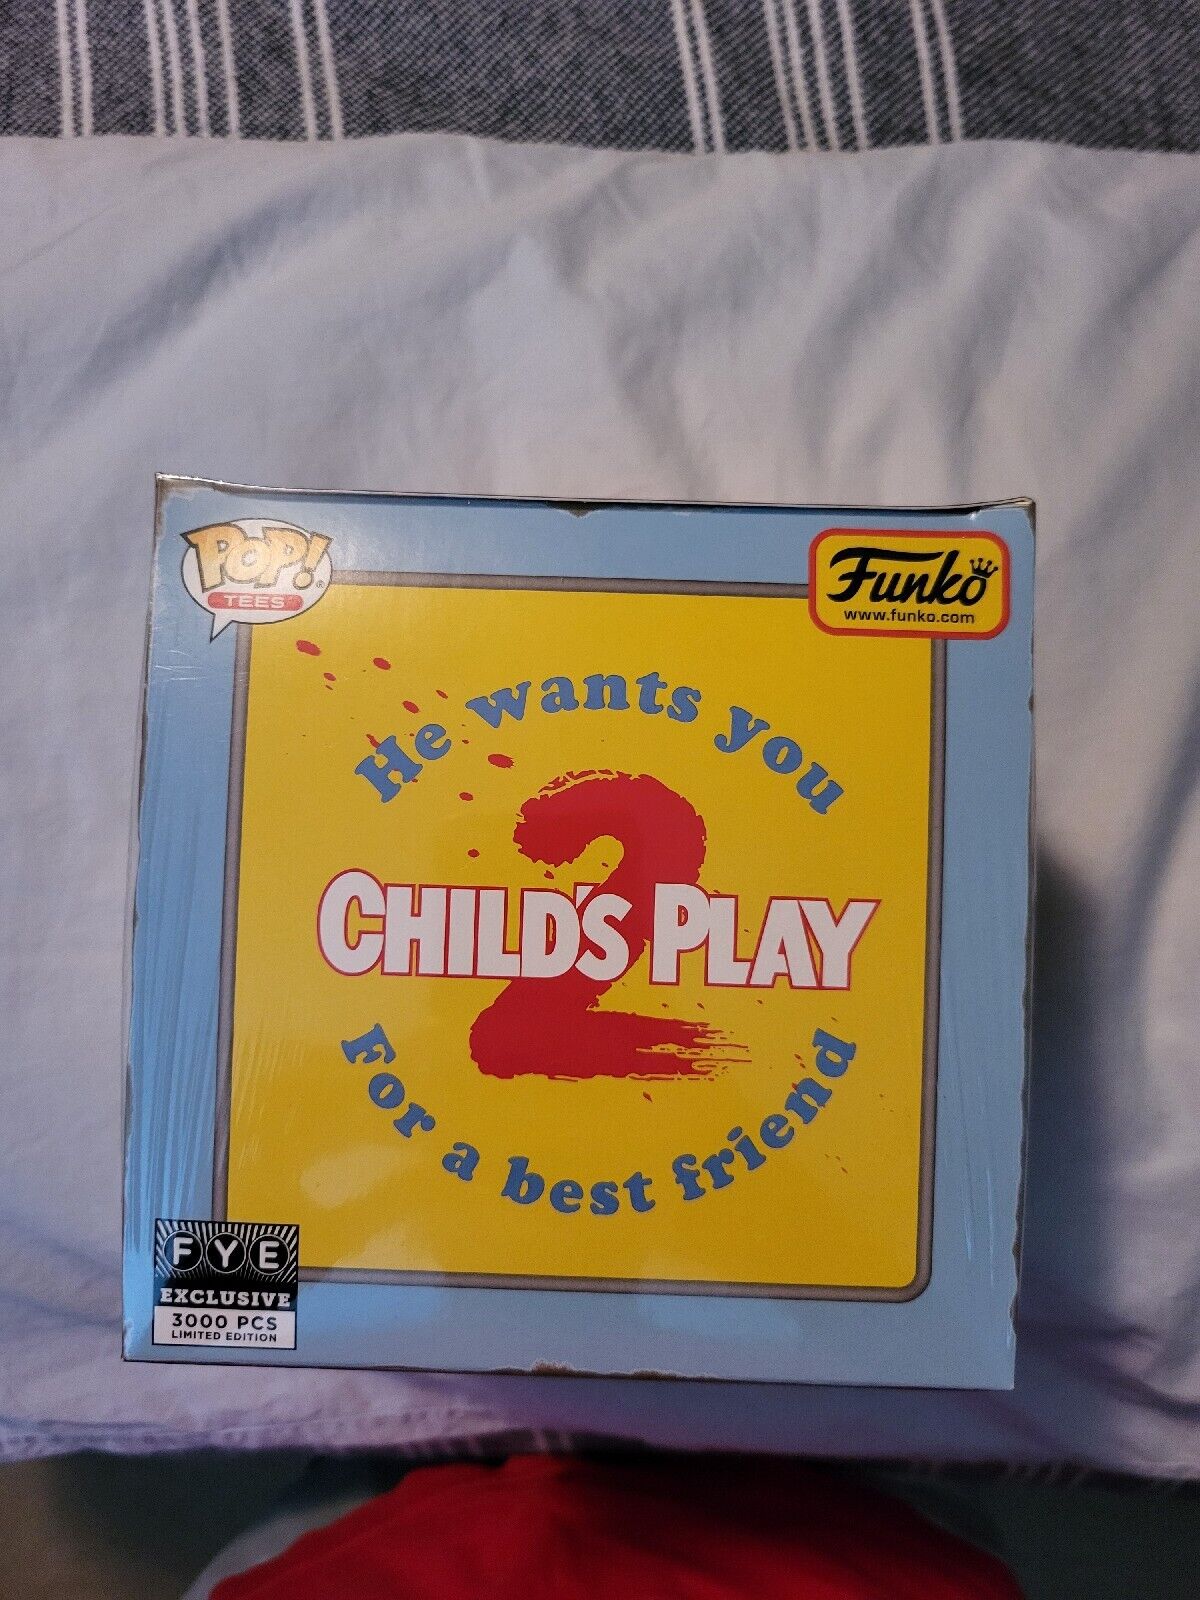 Child's Play 2 Shirt and Funko Pop FYE Exclusive XL size Brand New Sealed